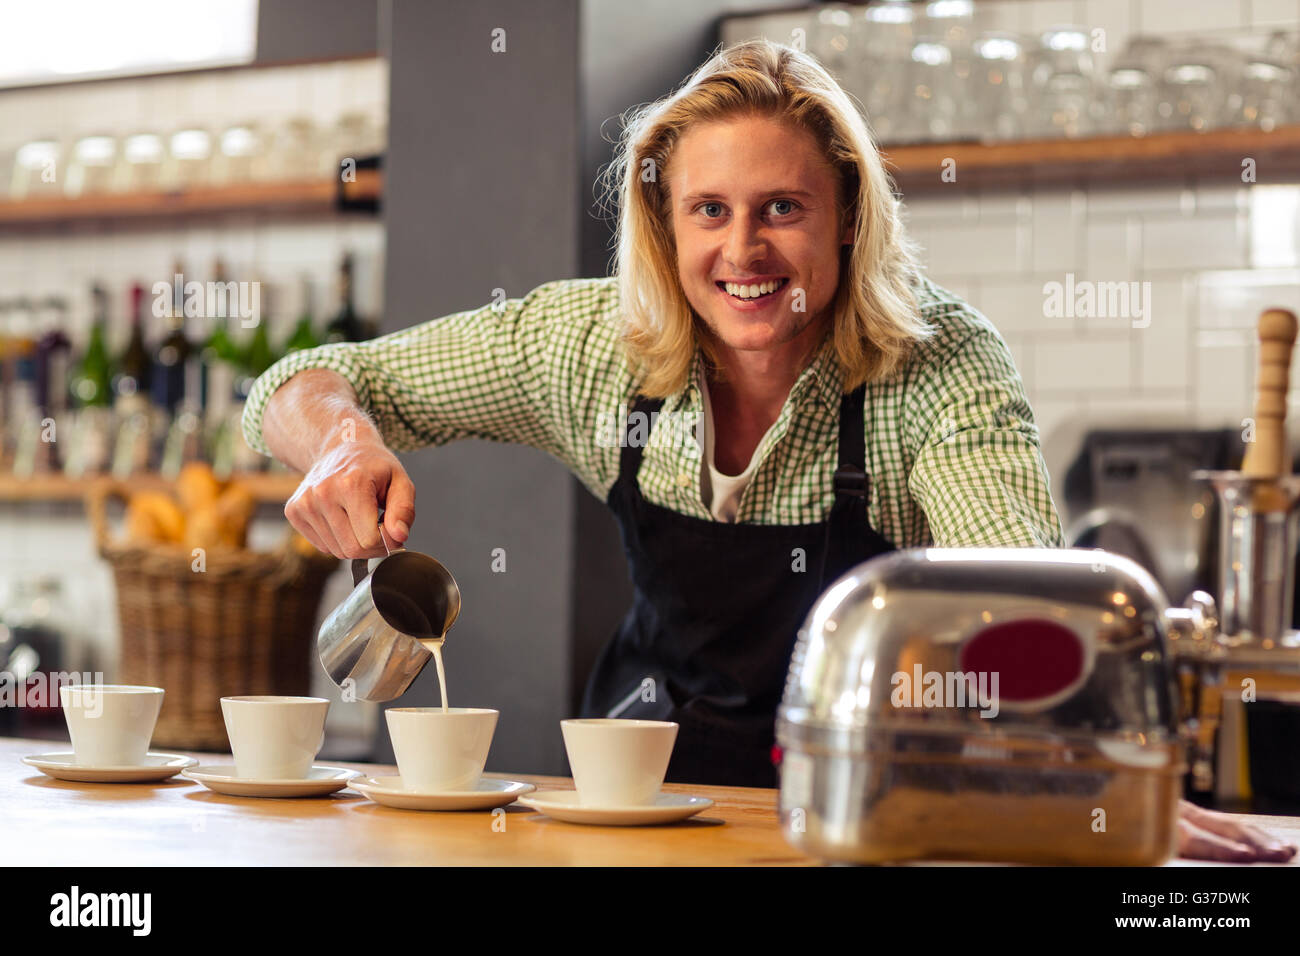 Bartender serving coffees Stock Photo